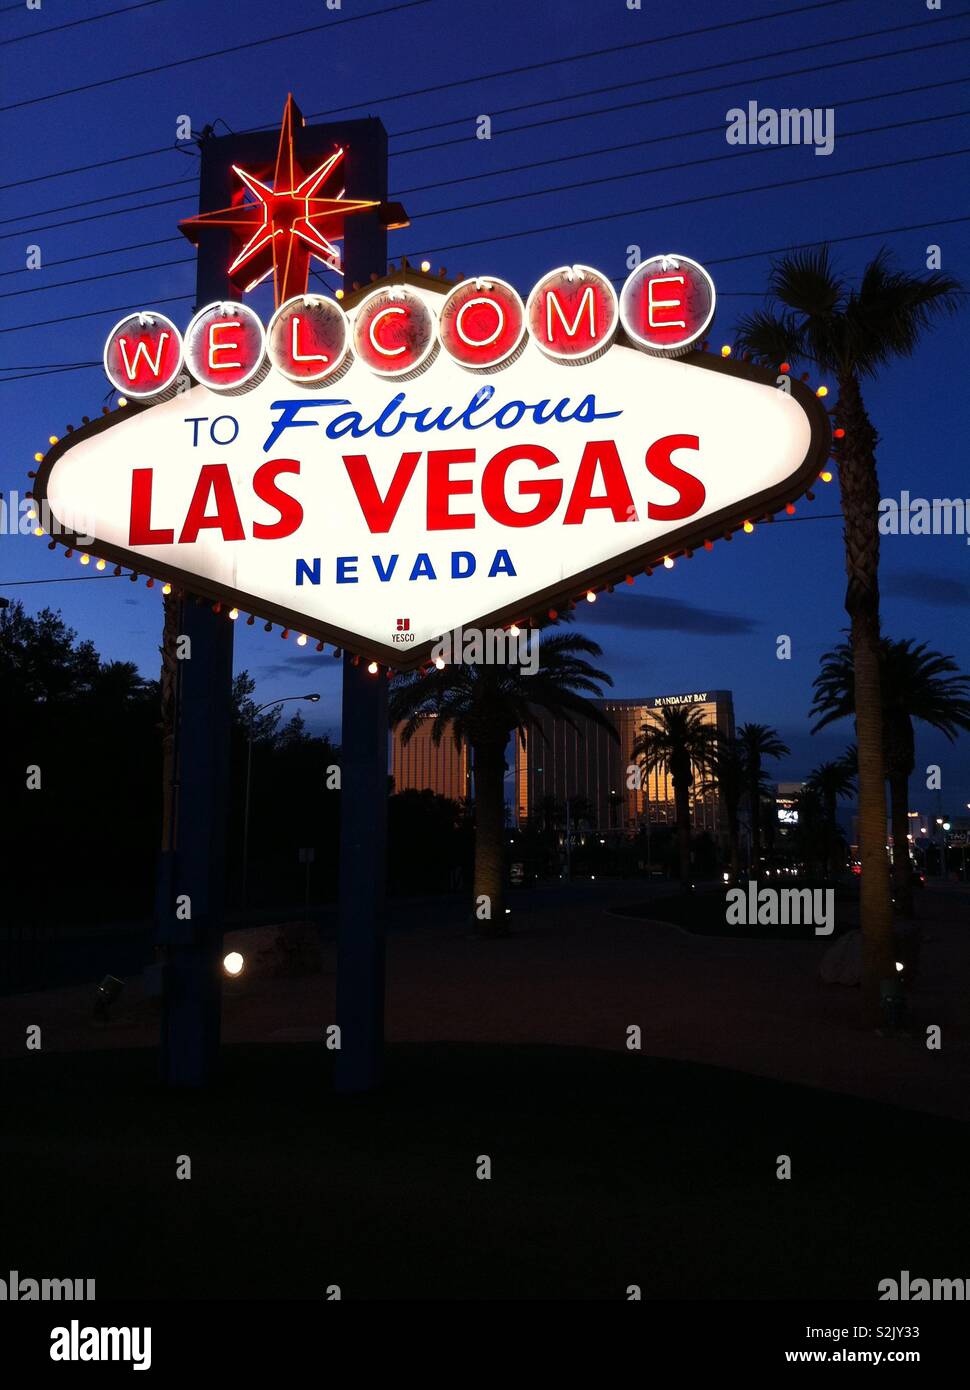 Welcome To Fabulous Las Vegas sign at night, Please attribu…